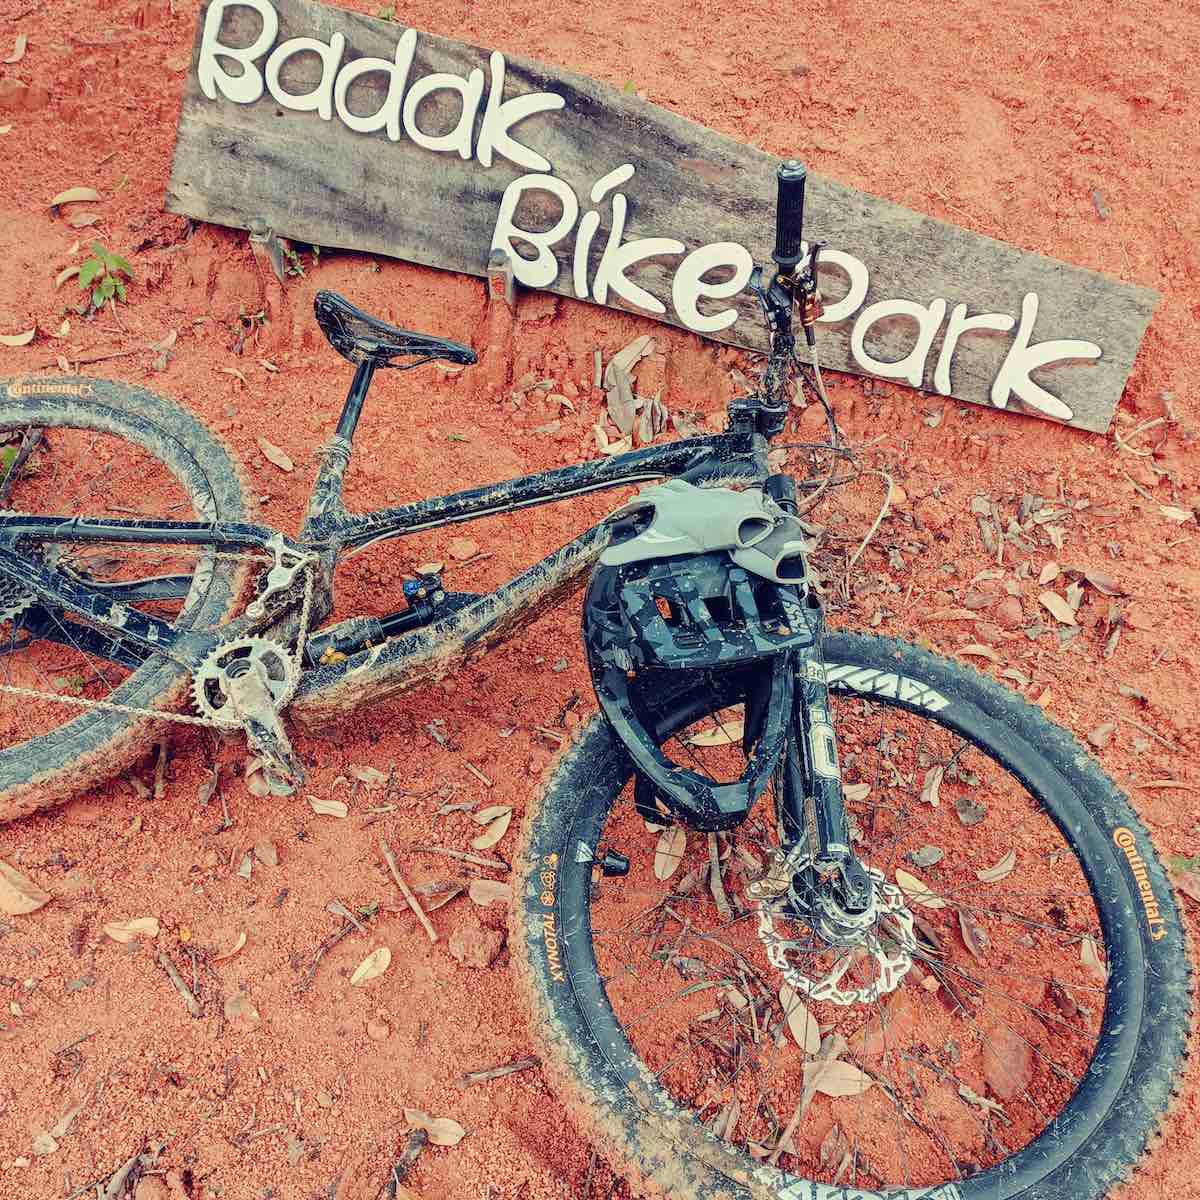 bikerumor pic of the day a mountain bike and helmet lay on the ground that is red dirt with some leaves and a wood sign for badak bike park